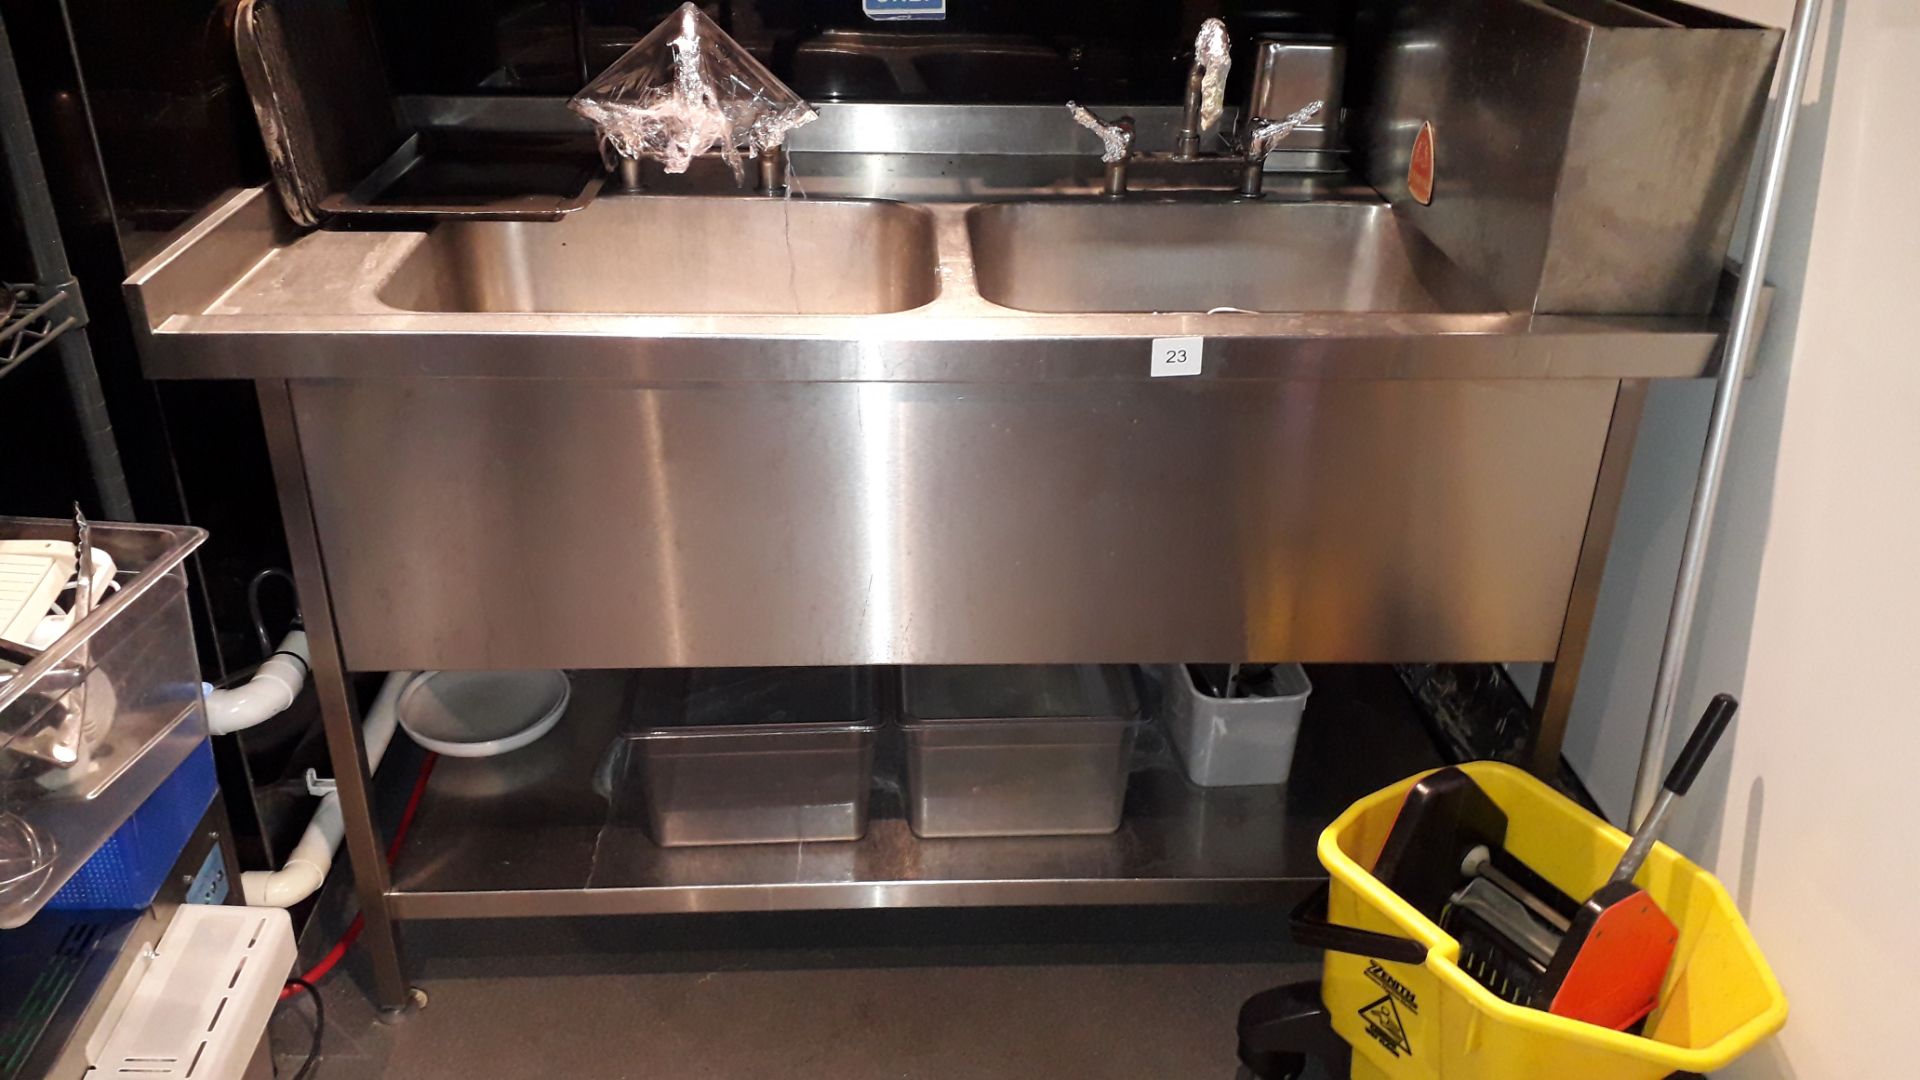 Stainless steel double deep Sink with grease shield GS1850 grease trap, serial number 208492 (2017)